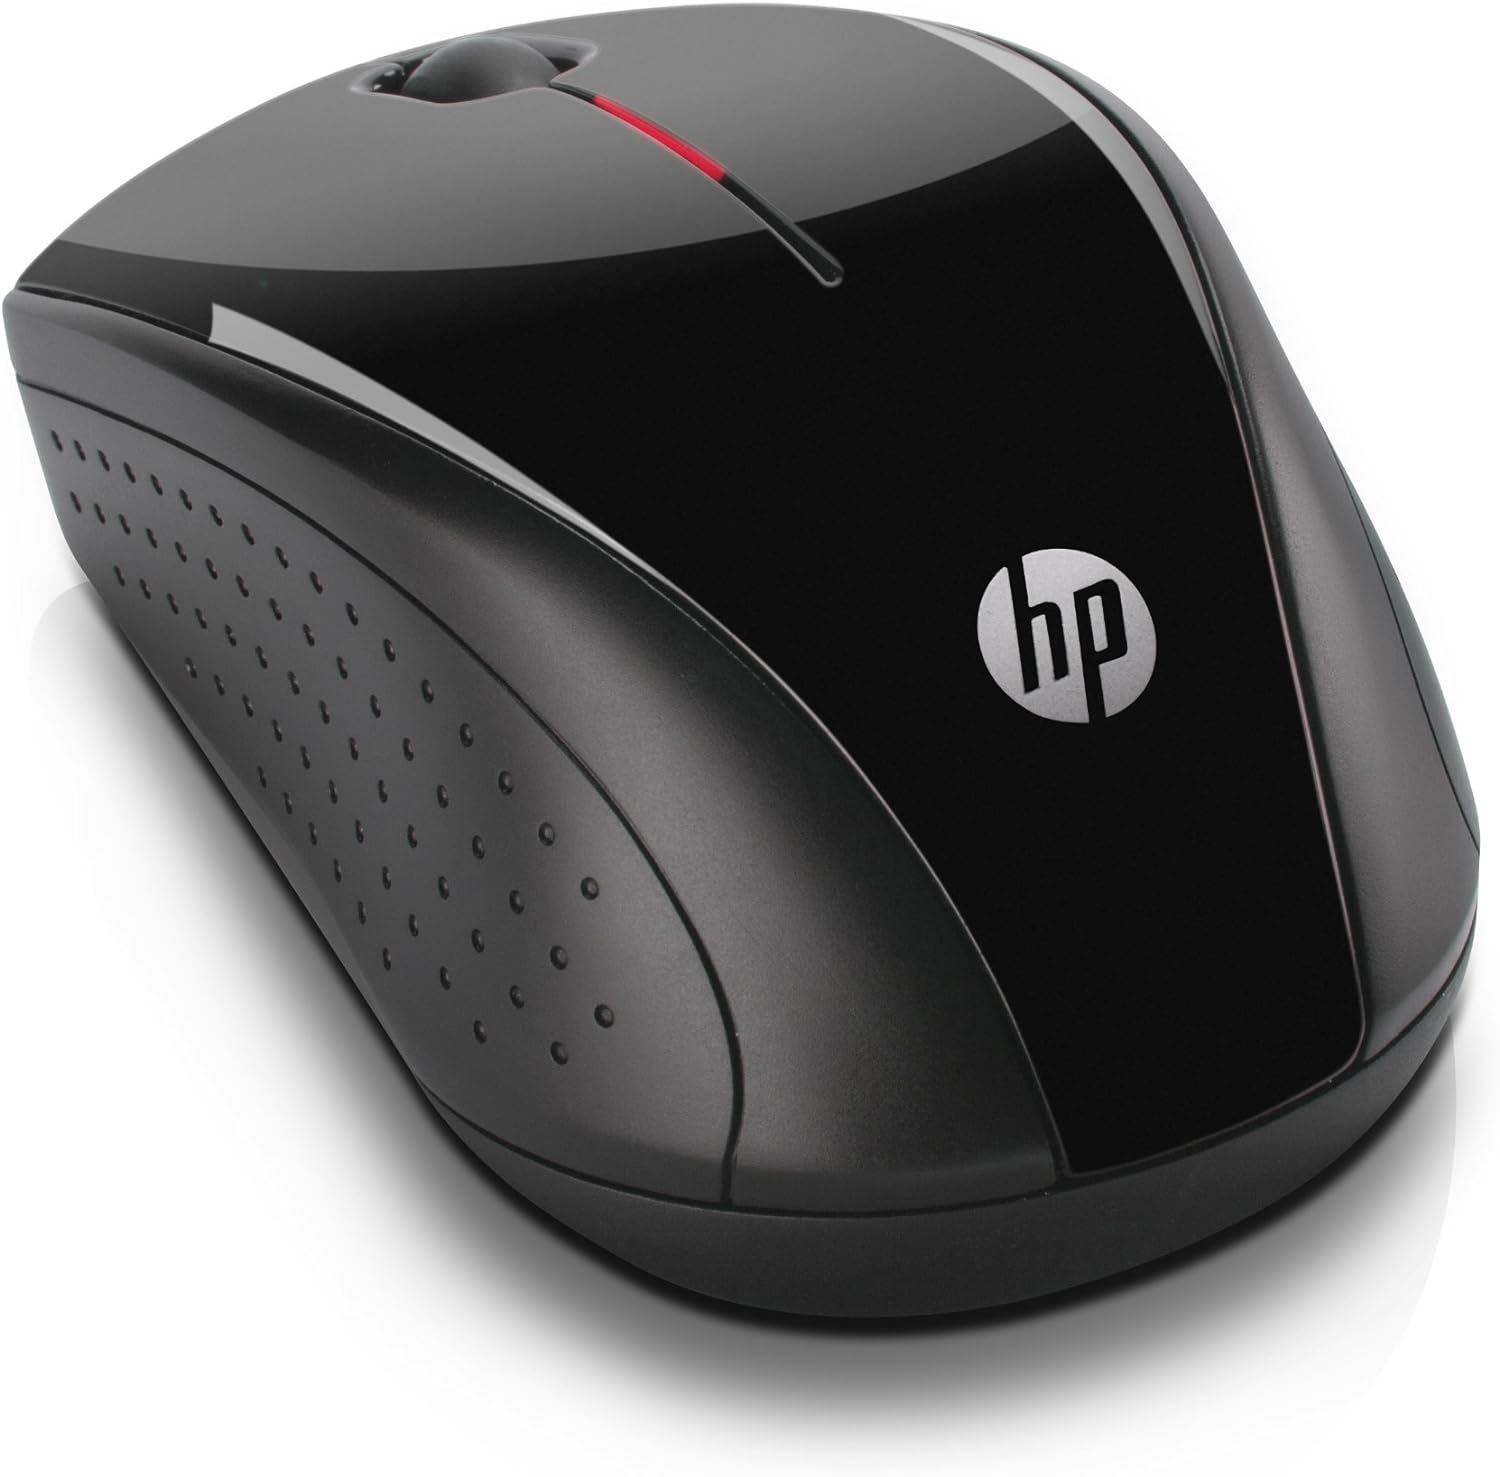 HP laptop with wireless adapter settings icon